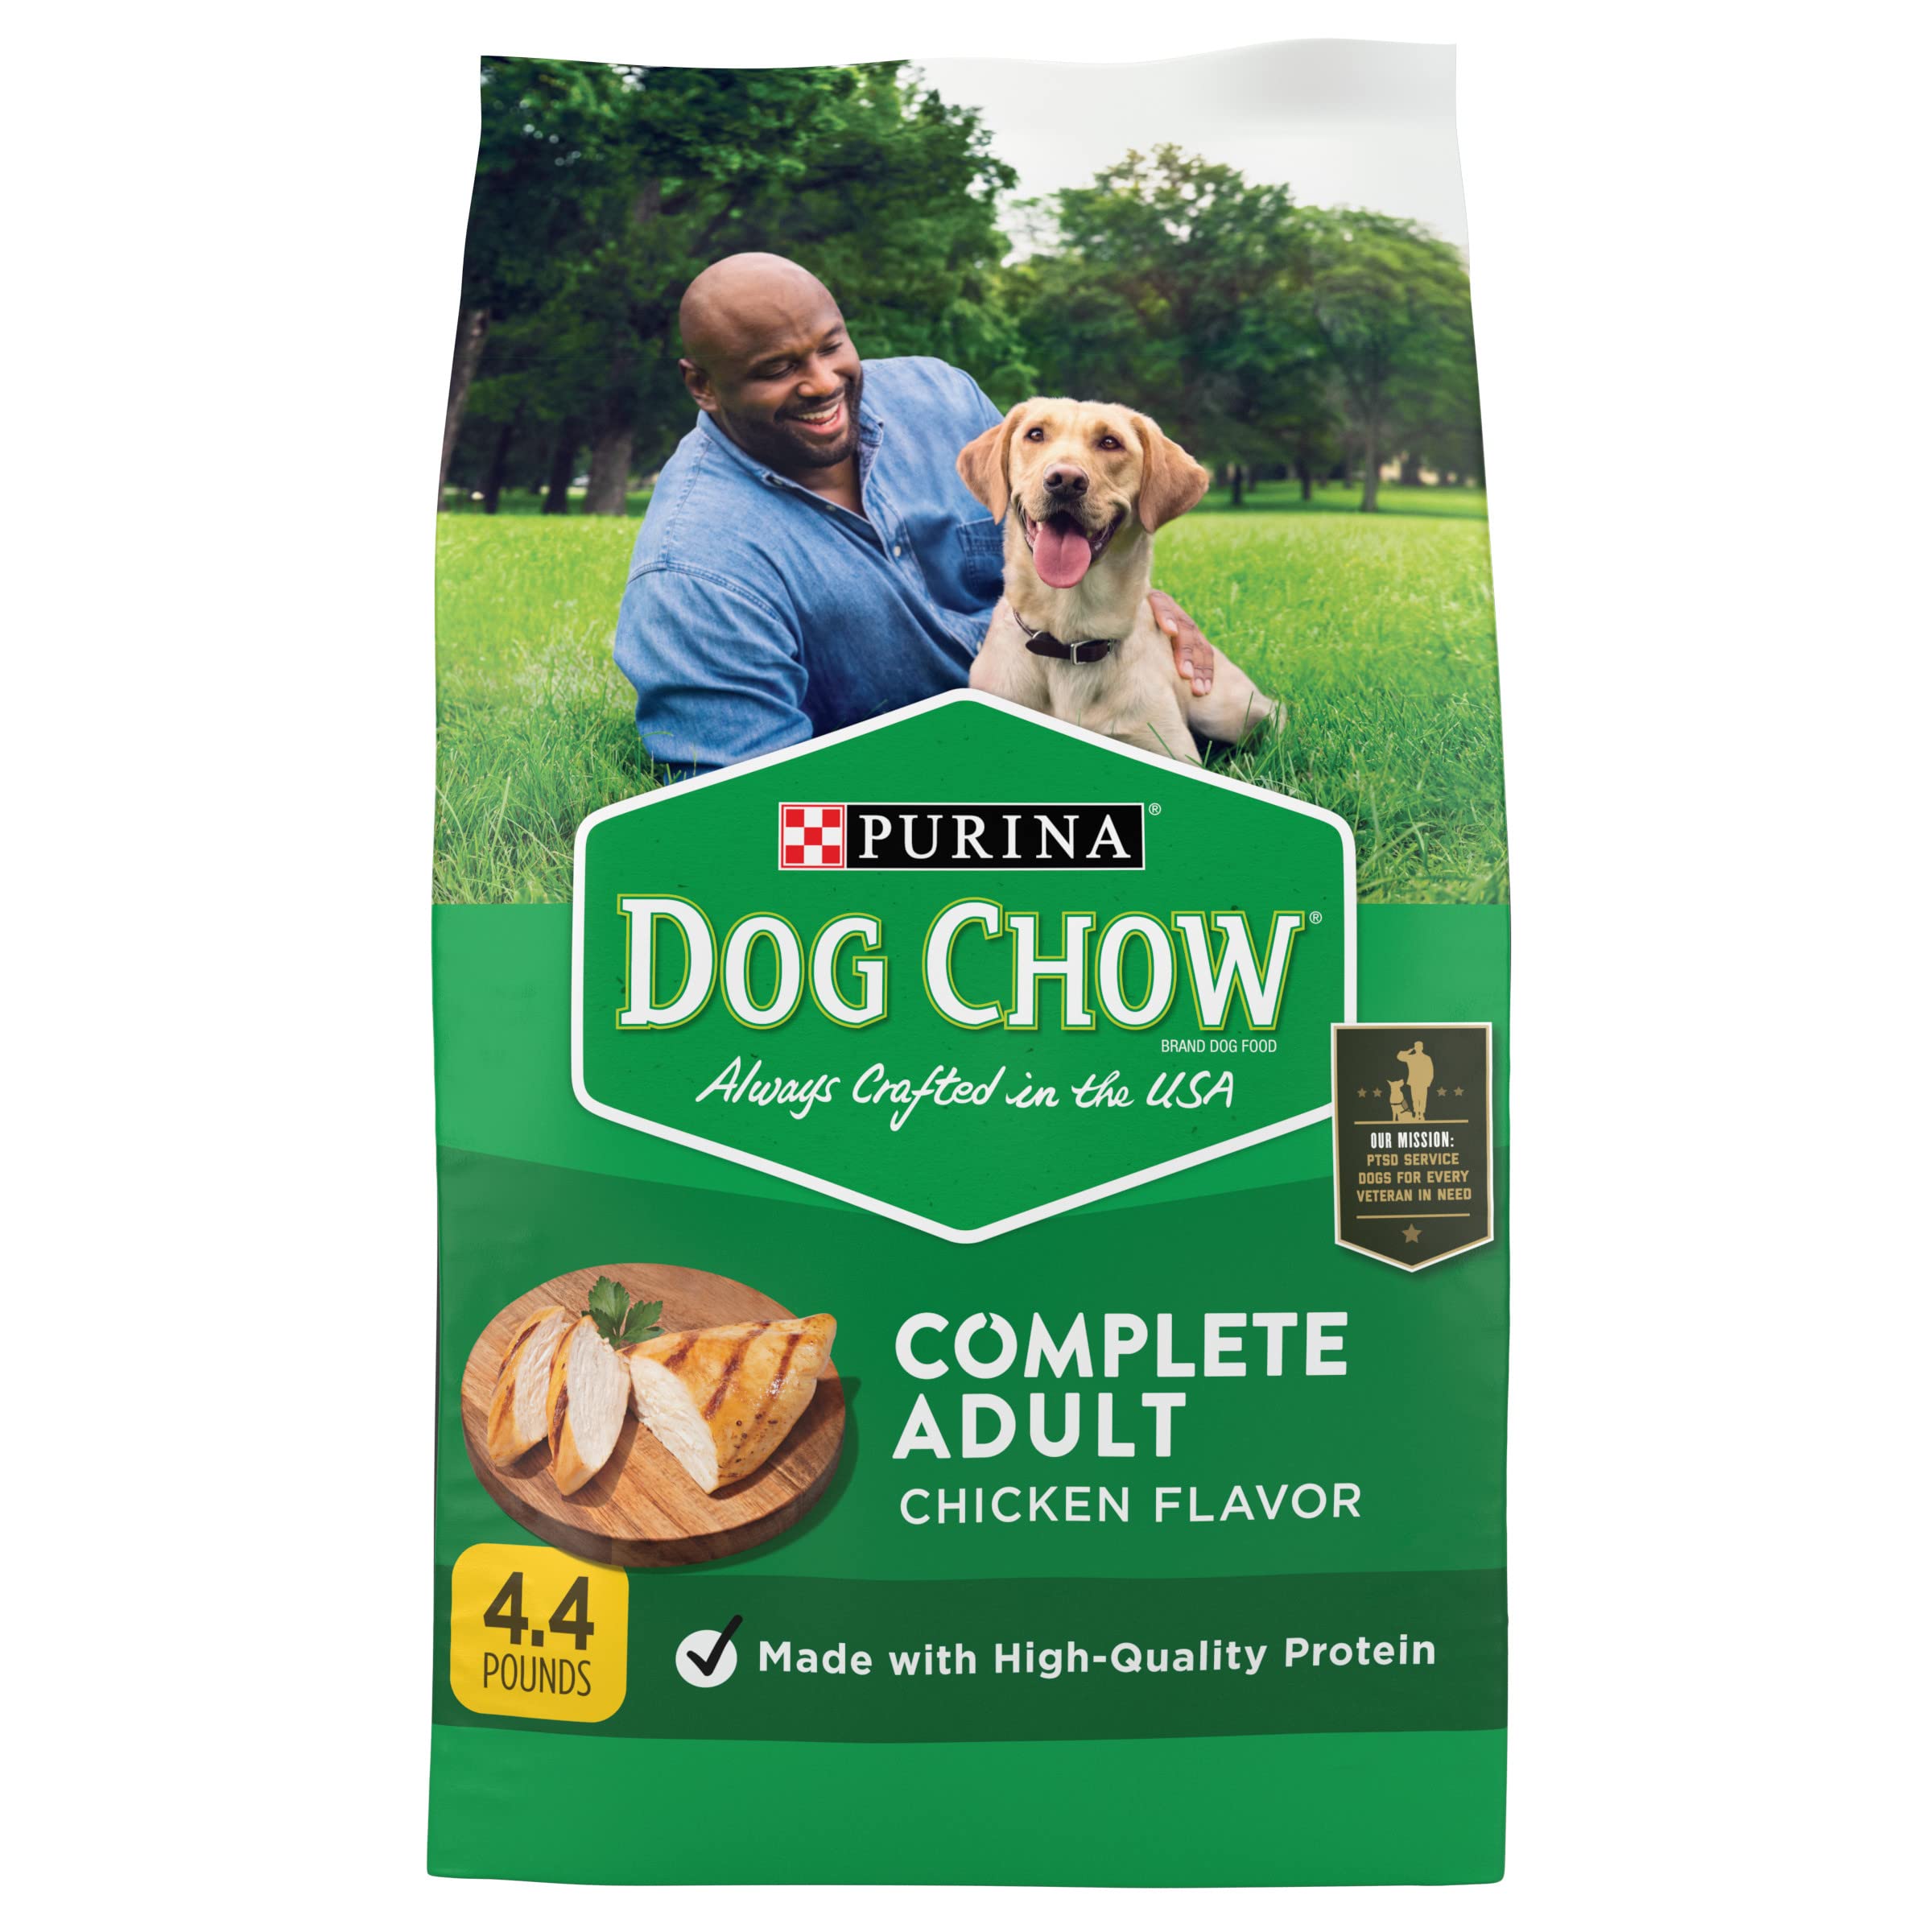 Purina Dog Chow Complete Adult Dry Dog Food Kibble With Chicken Flavor - (4) 4.4 lb. Bags